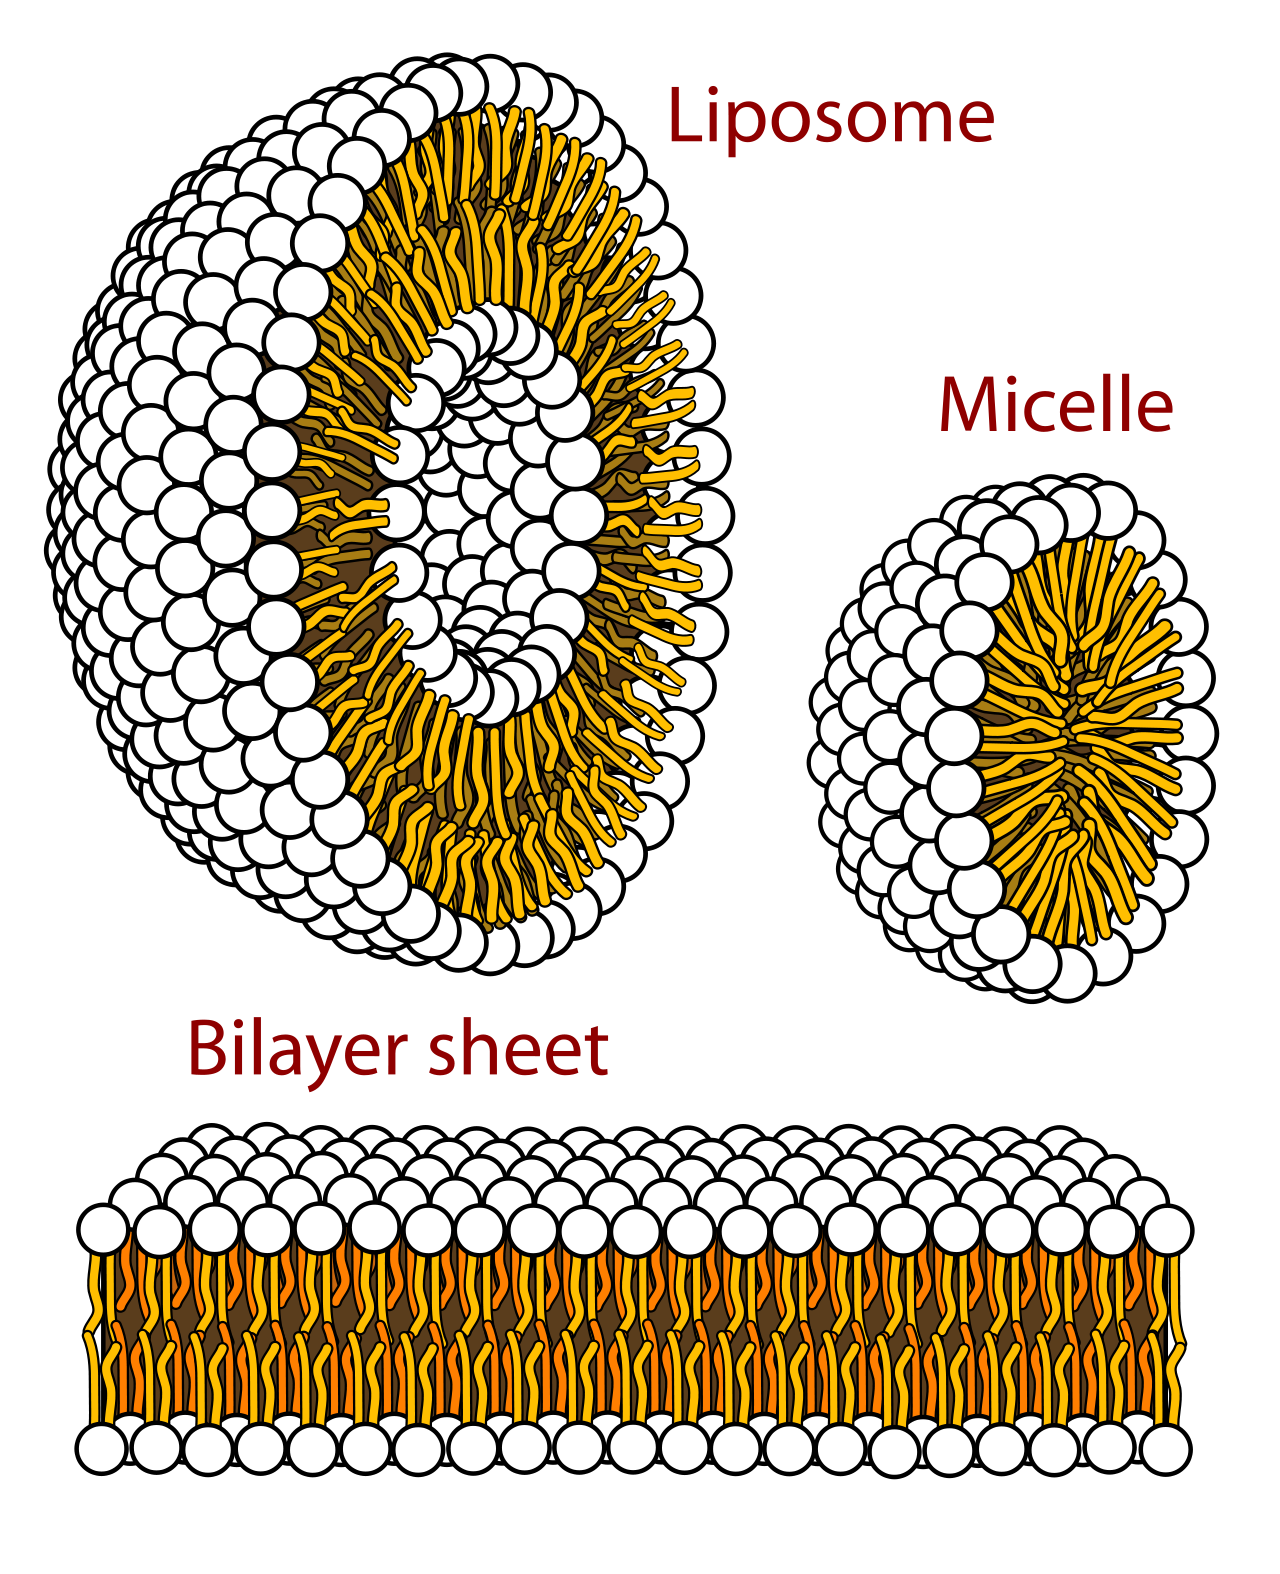 Micelles and bilayers